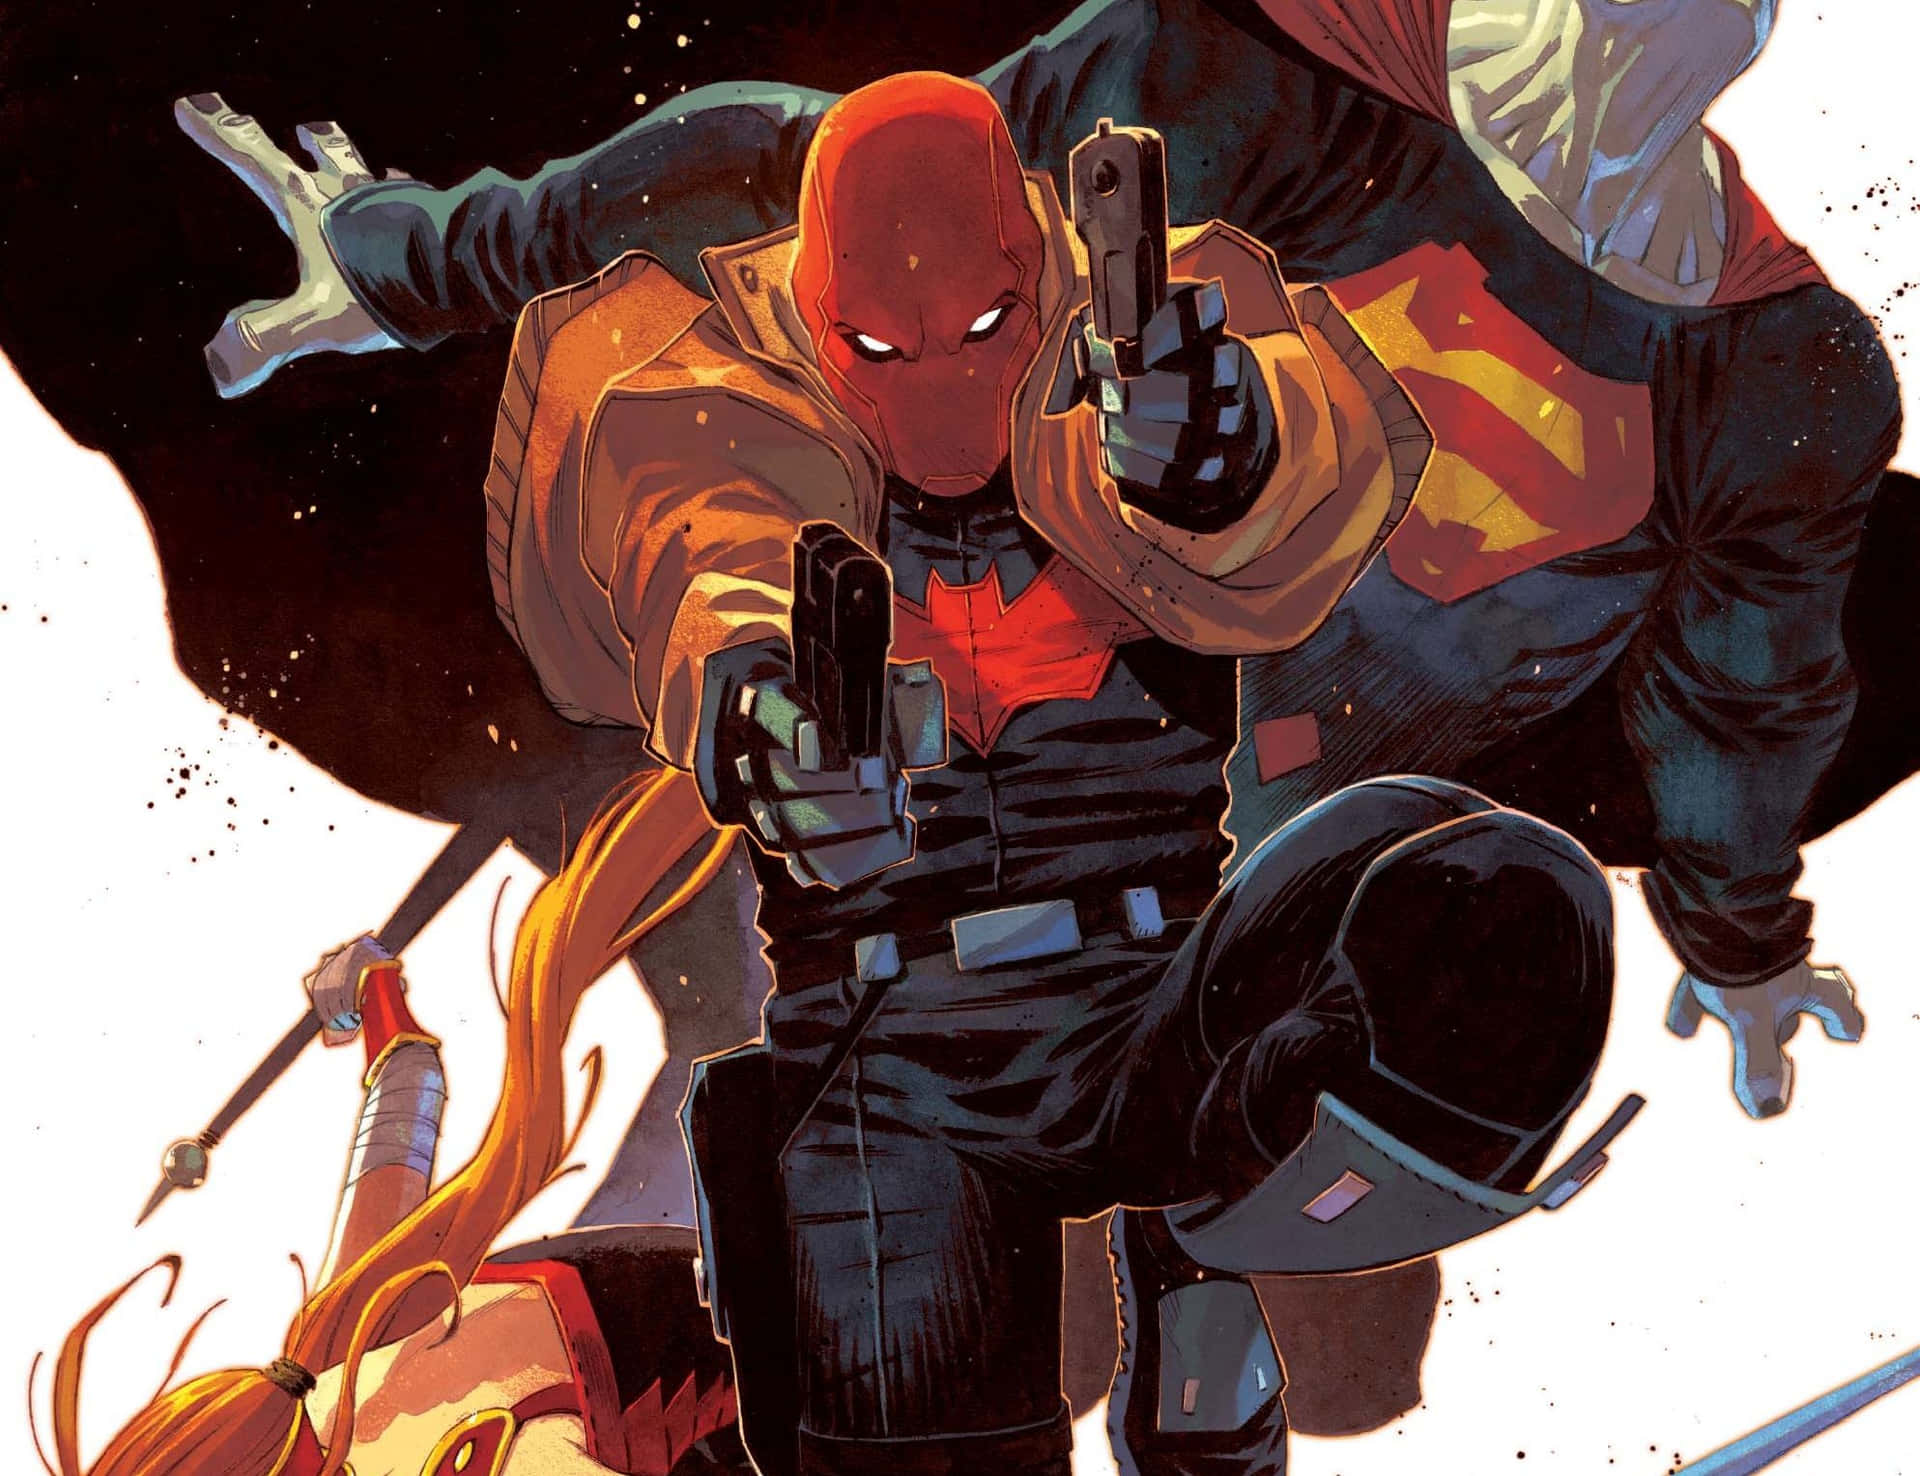 red hood and the outlaws wallpaper